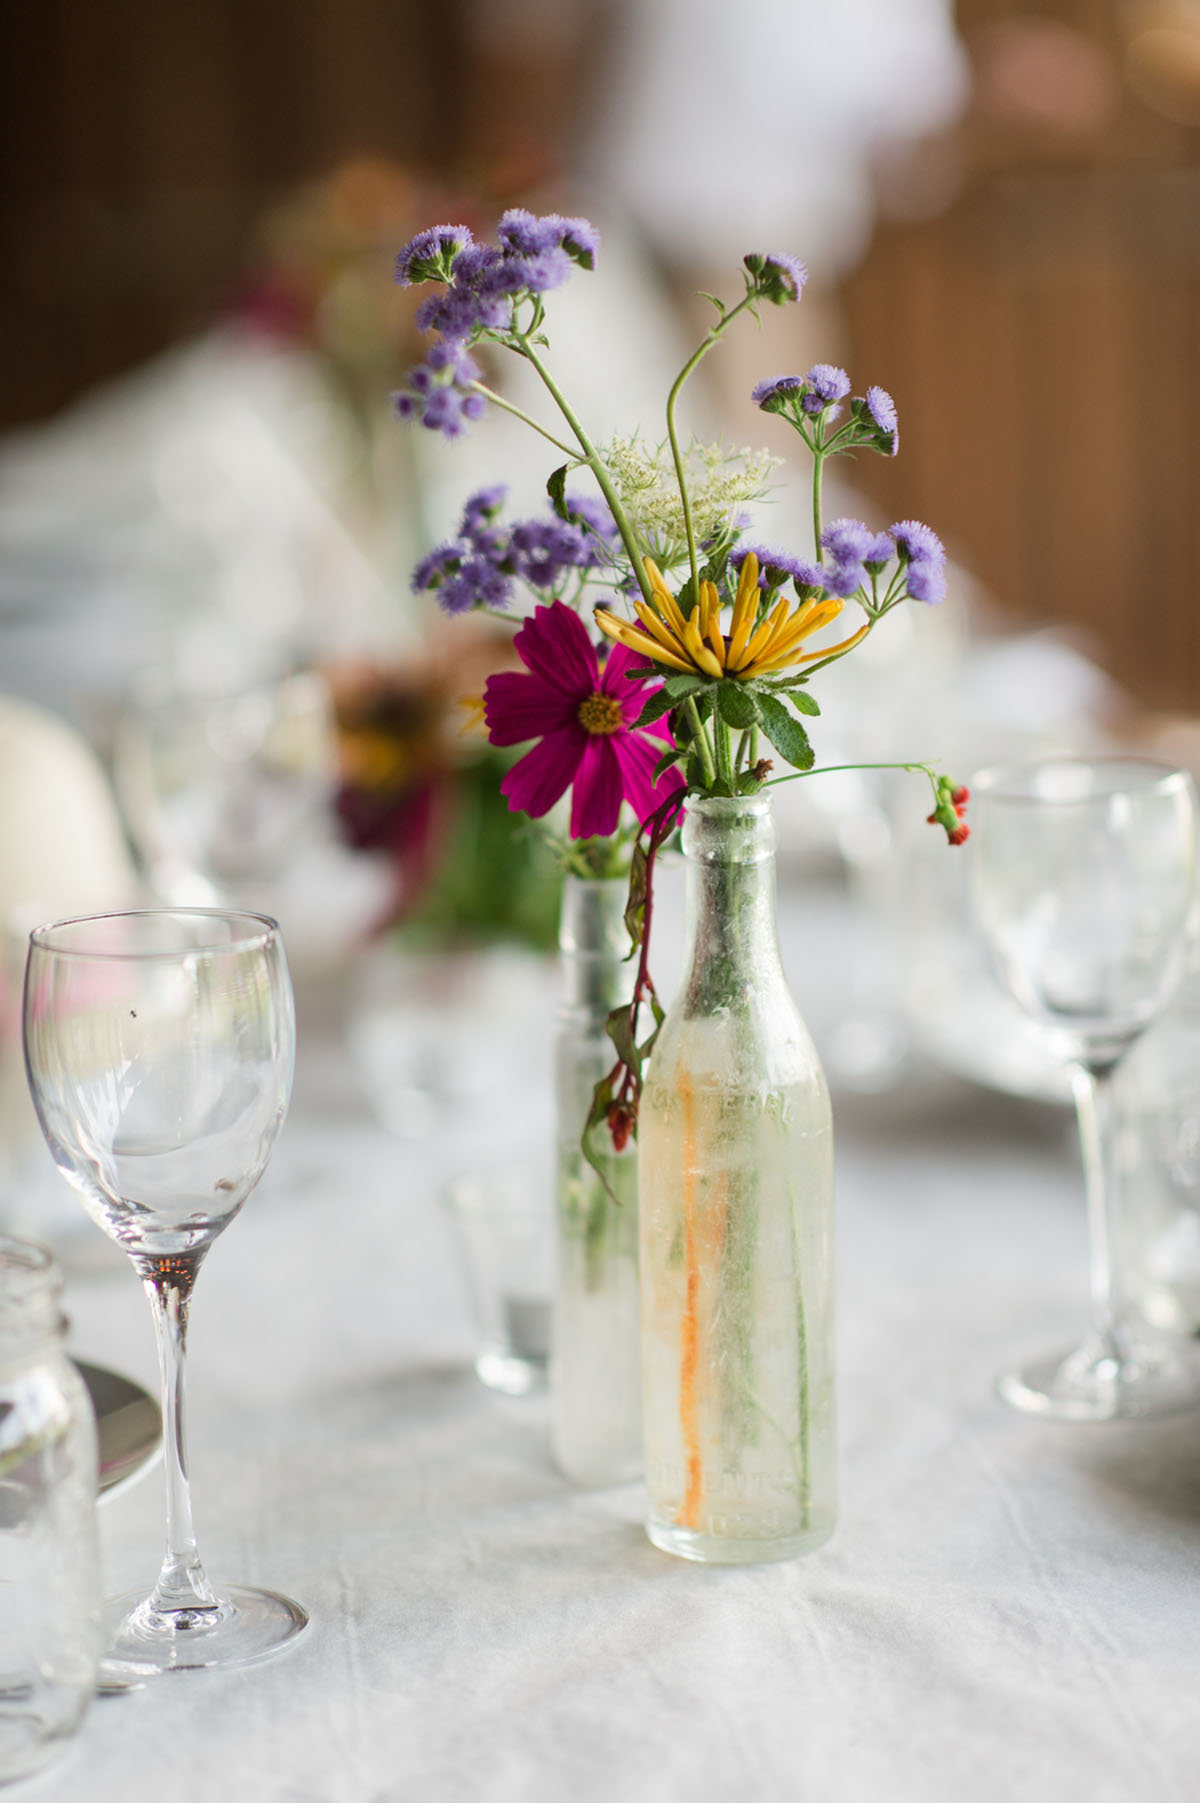 Lesbian wedding with summer garden and creative floral bouquets floral centerpiece